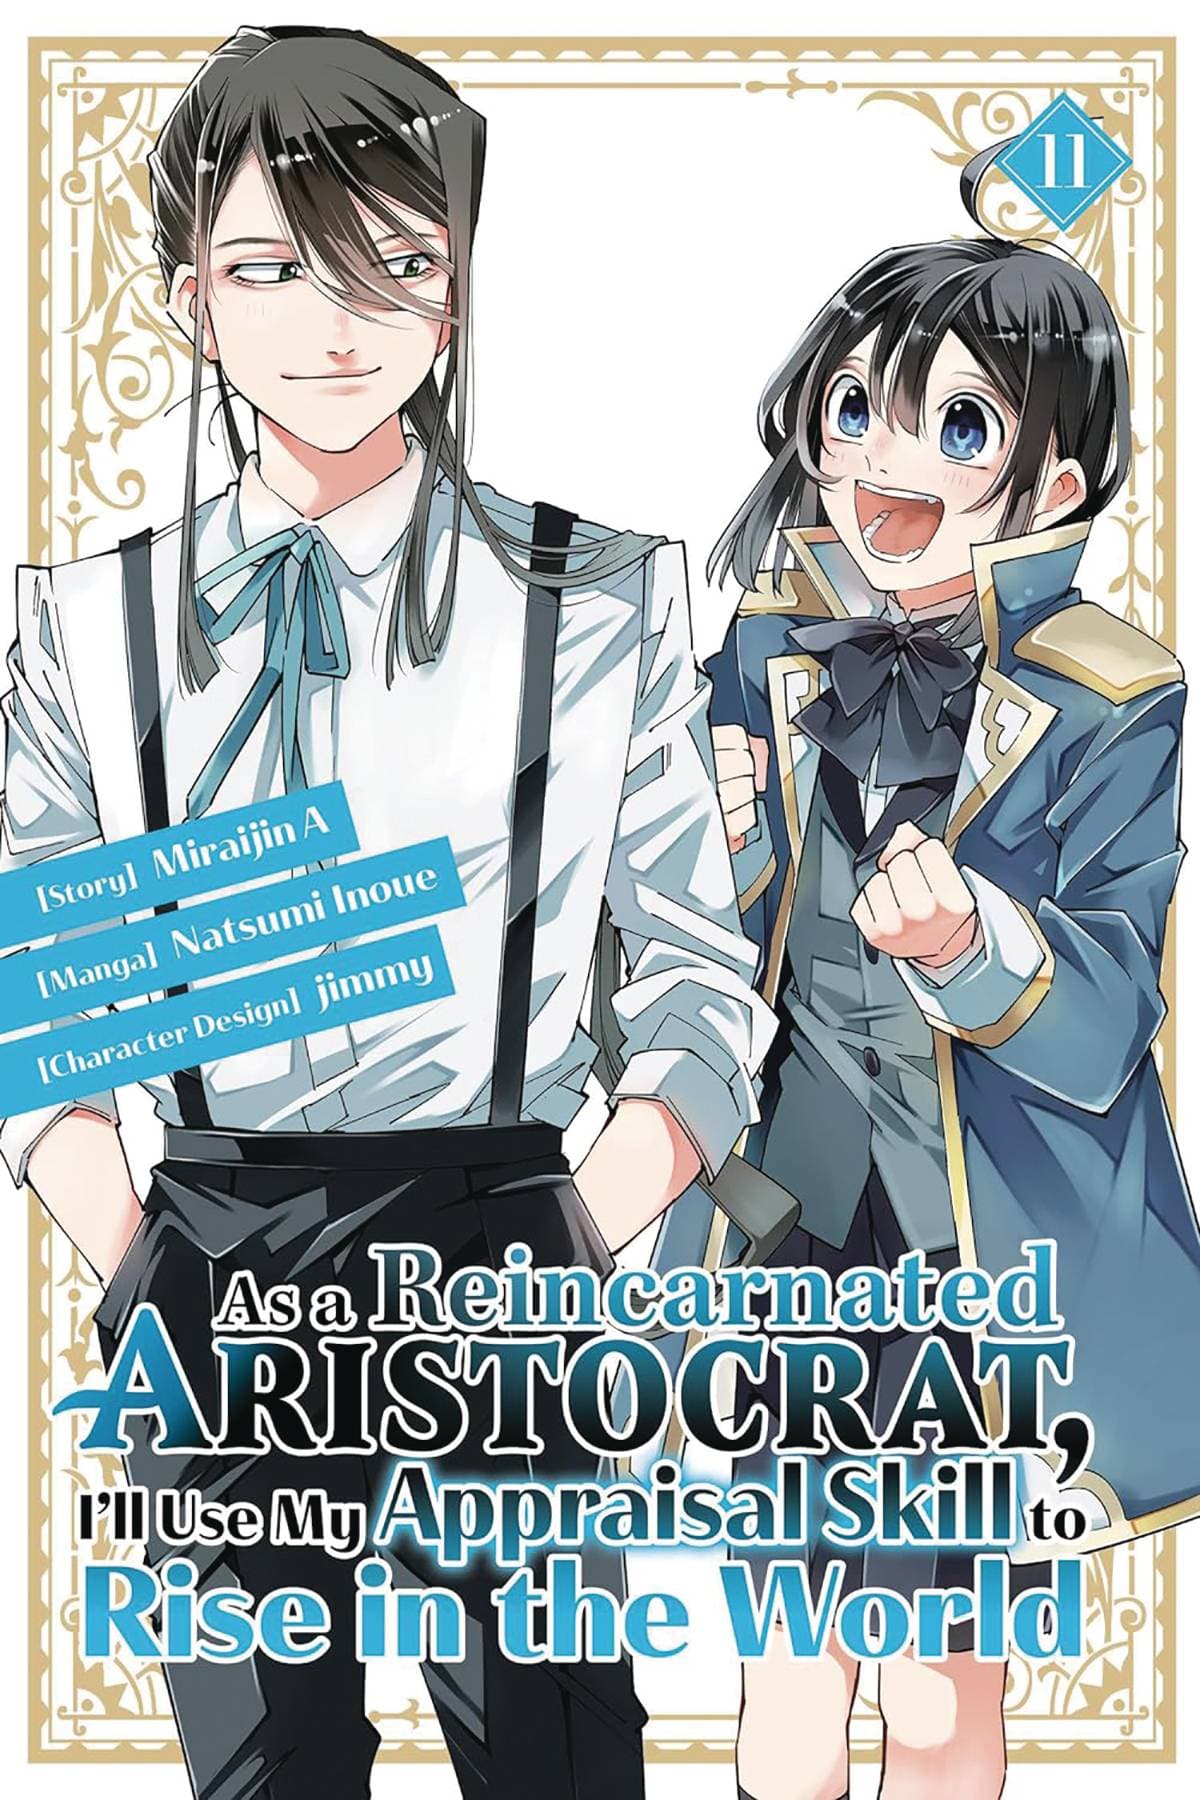 AS A REINCARNATED ARISTOCRAT USE APPRAISAL SKILL GN VOL 11 (